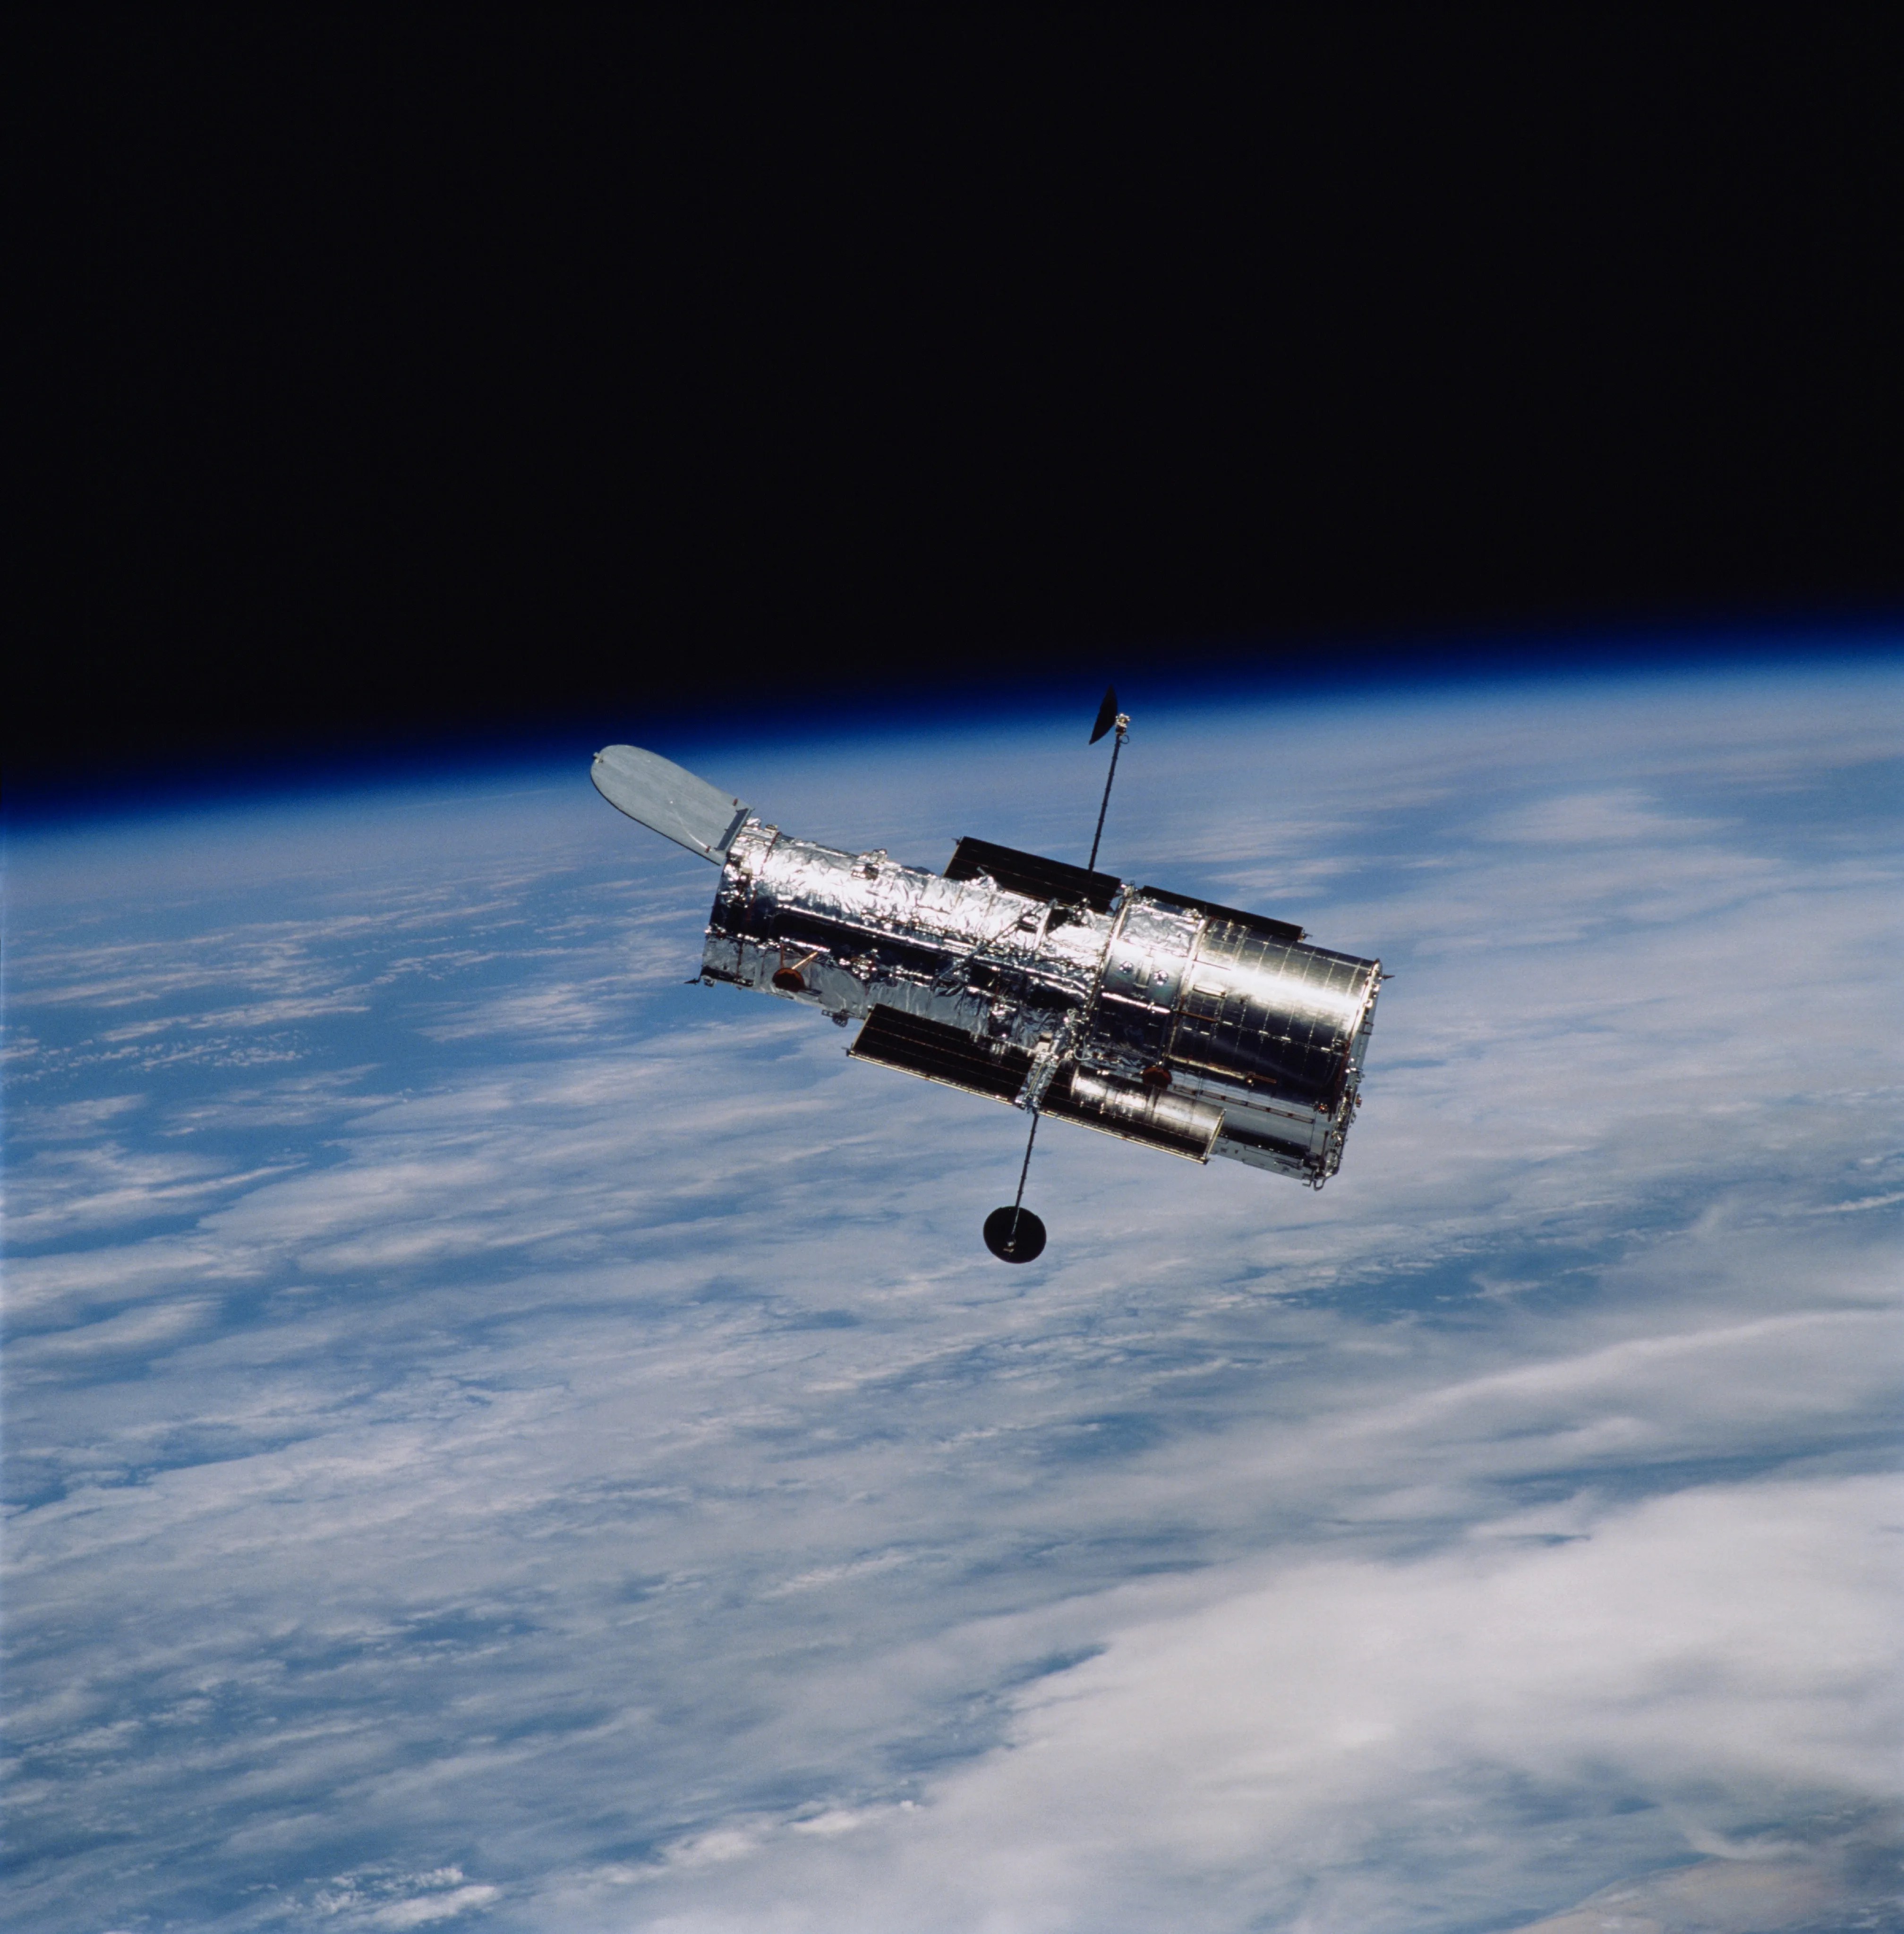 The Hubble Space Telescope is seen in orbit, with the cloudy and blue surface of Earth behind it, with black space above it.